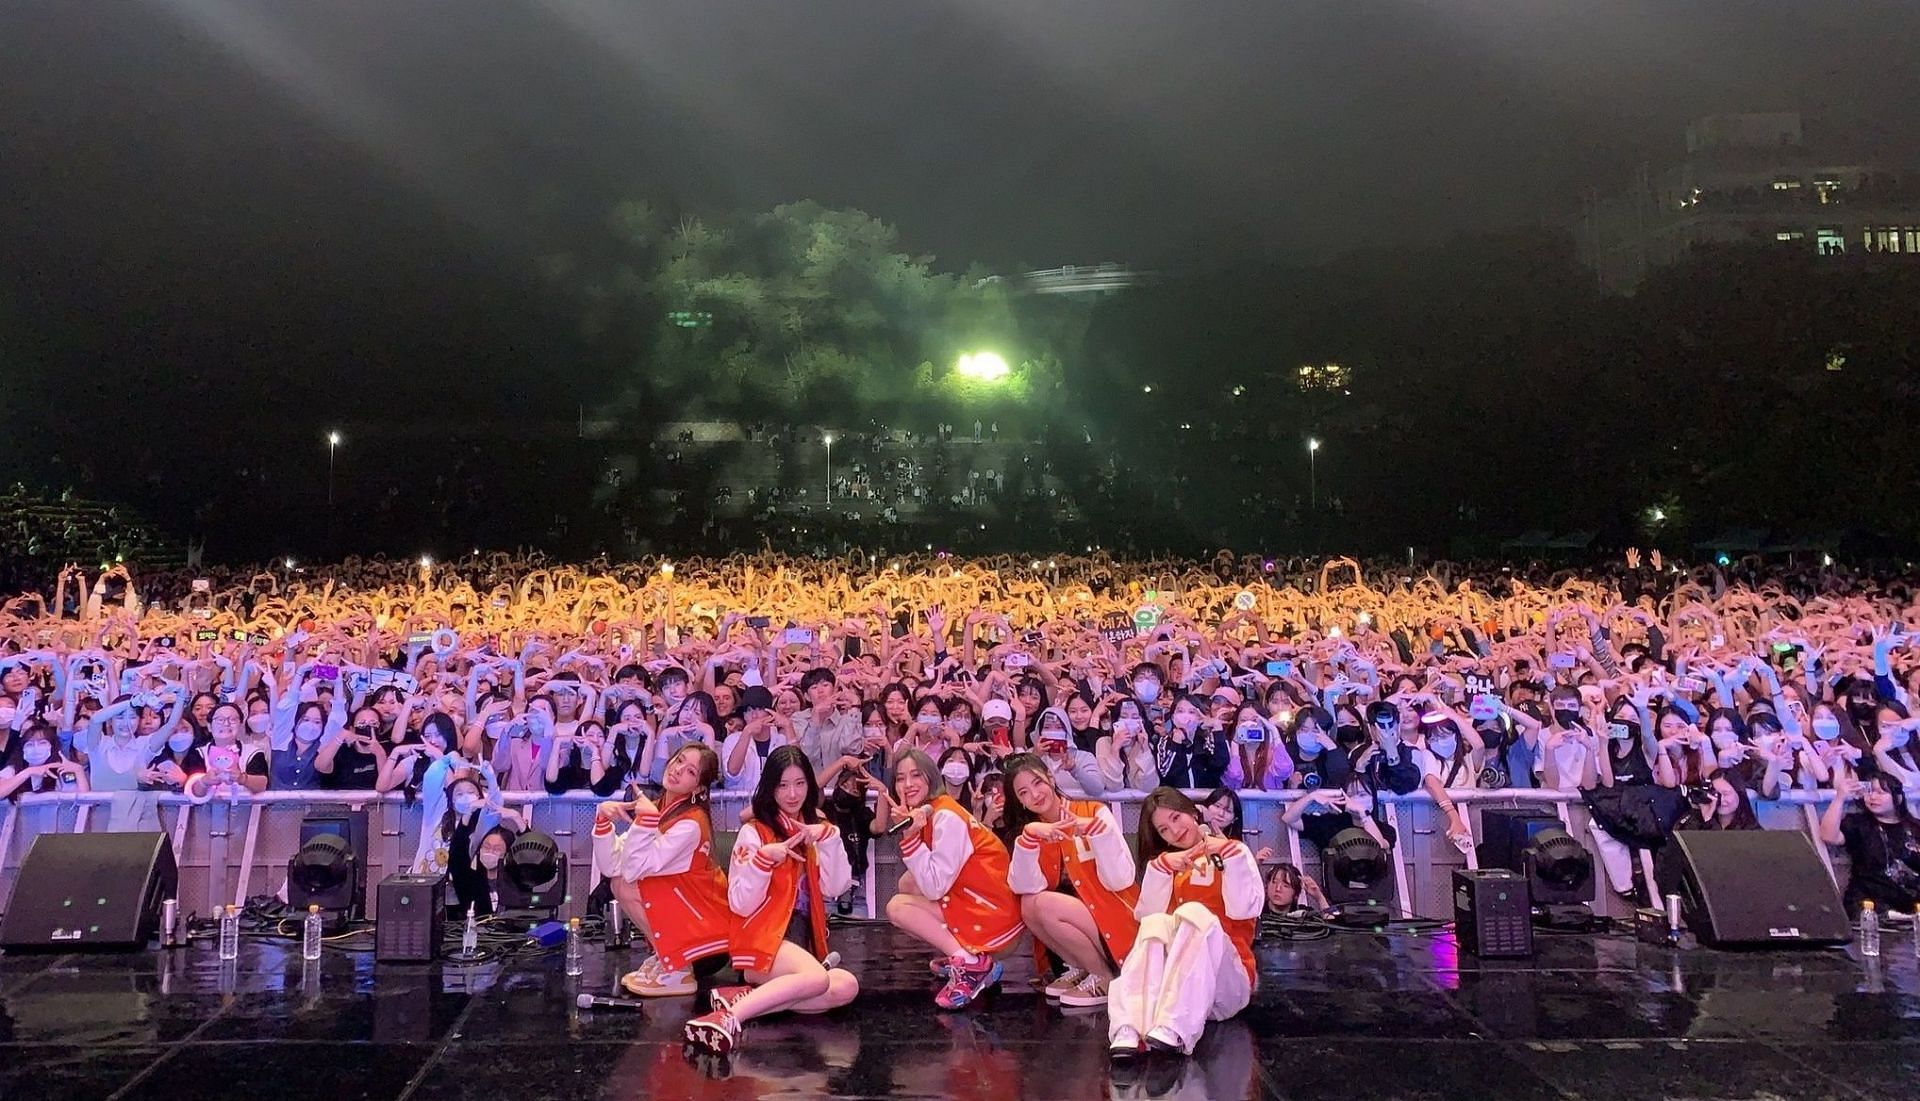 A still of the K-pop group ITZY performing at the DongGuk University festival (Image via Instagram/@itzy.all.in.us)